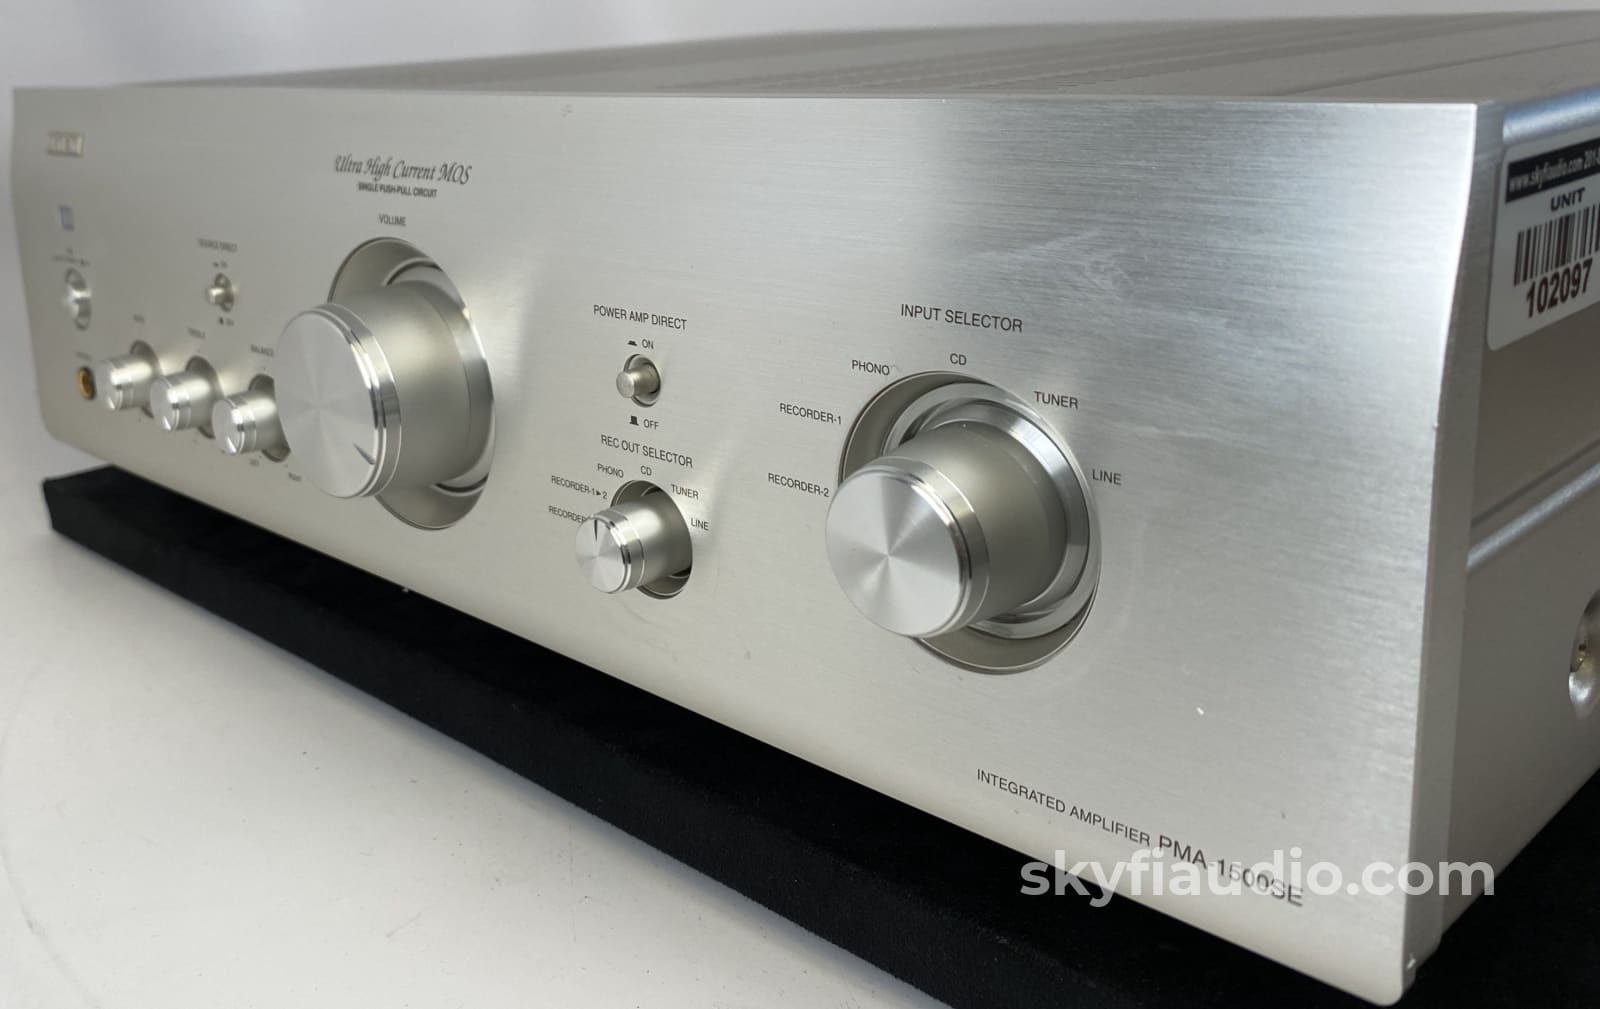 Denon PMA-1500SE Integrated Amplifier With MM or MC Phono Input